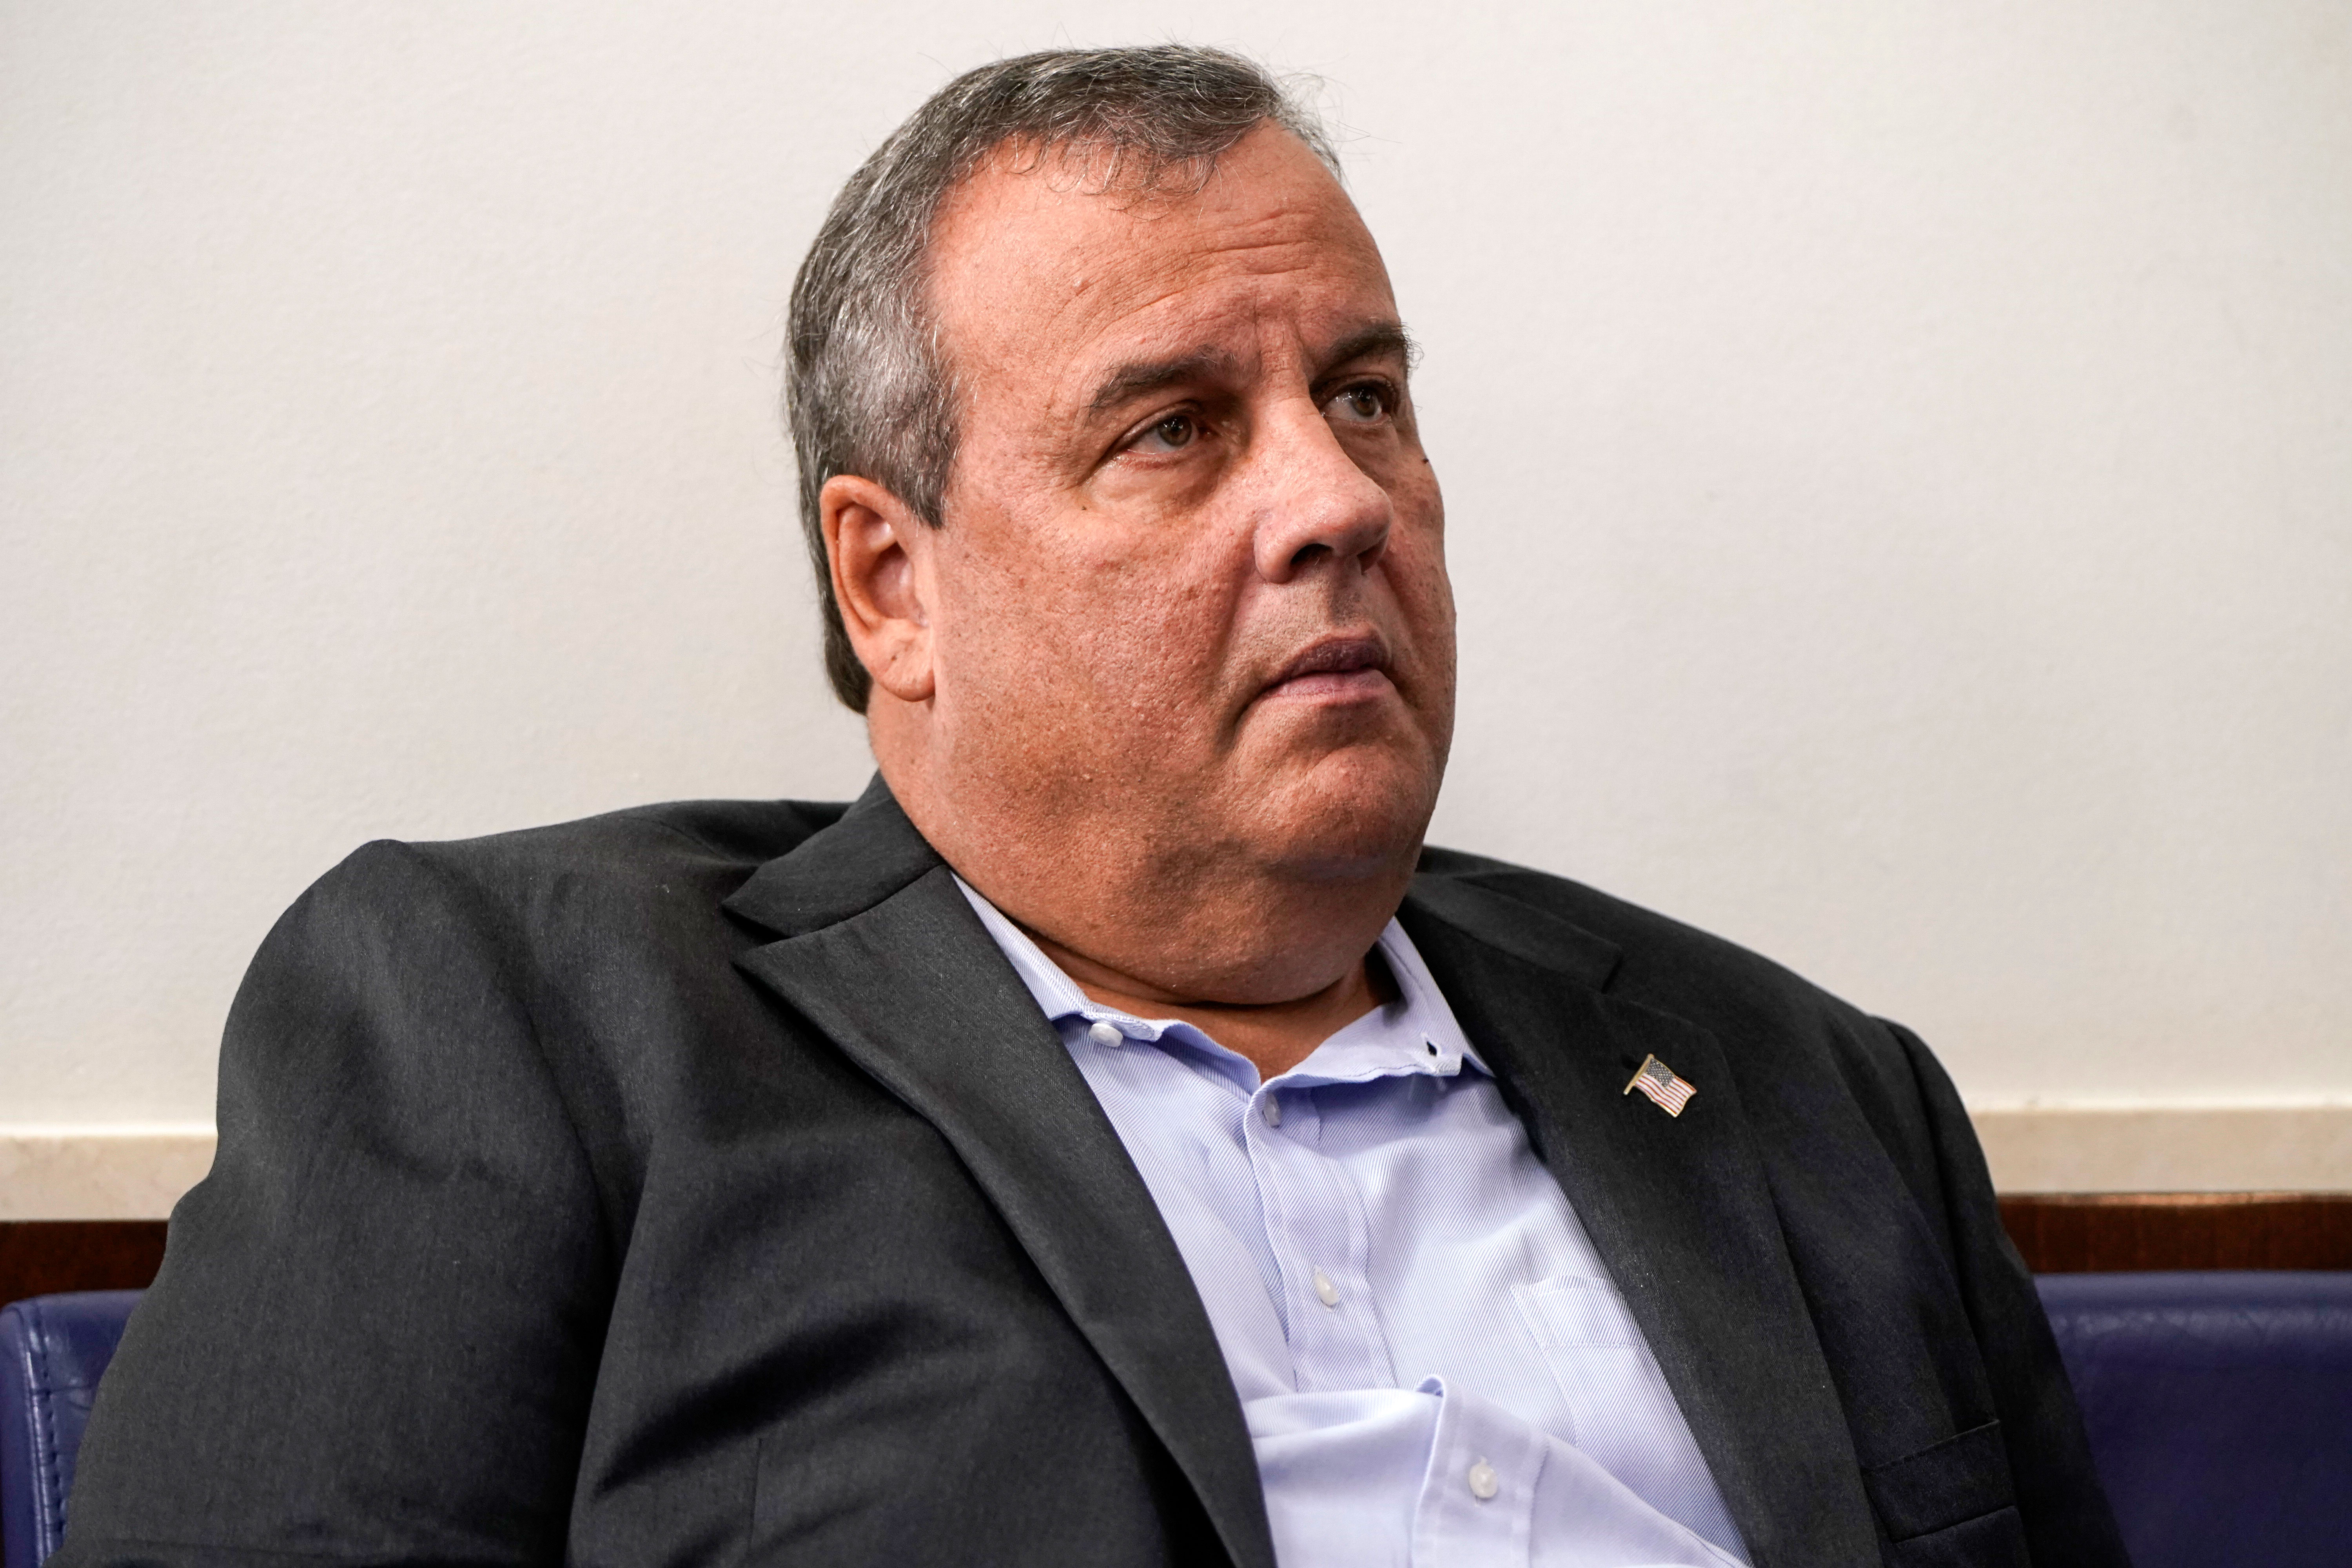 Former New Jersey Gov. Chris Christie attends a news conference at the White House on September 27.